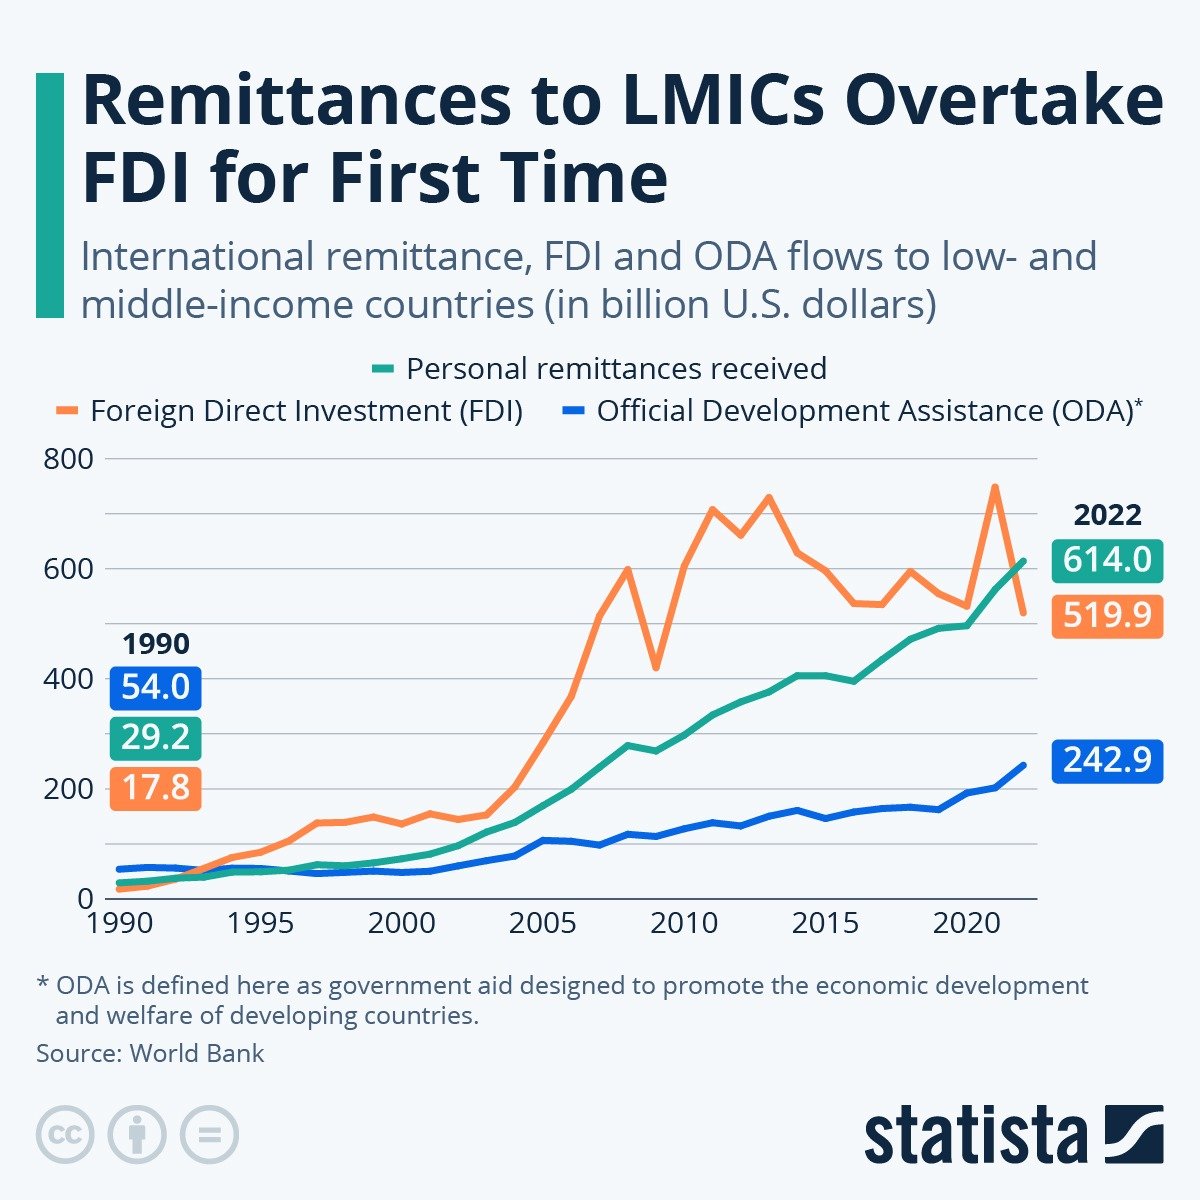 Remittances > FDI for low and middle-income countries: